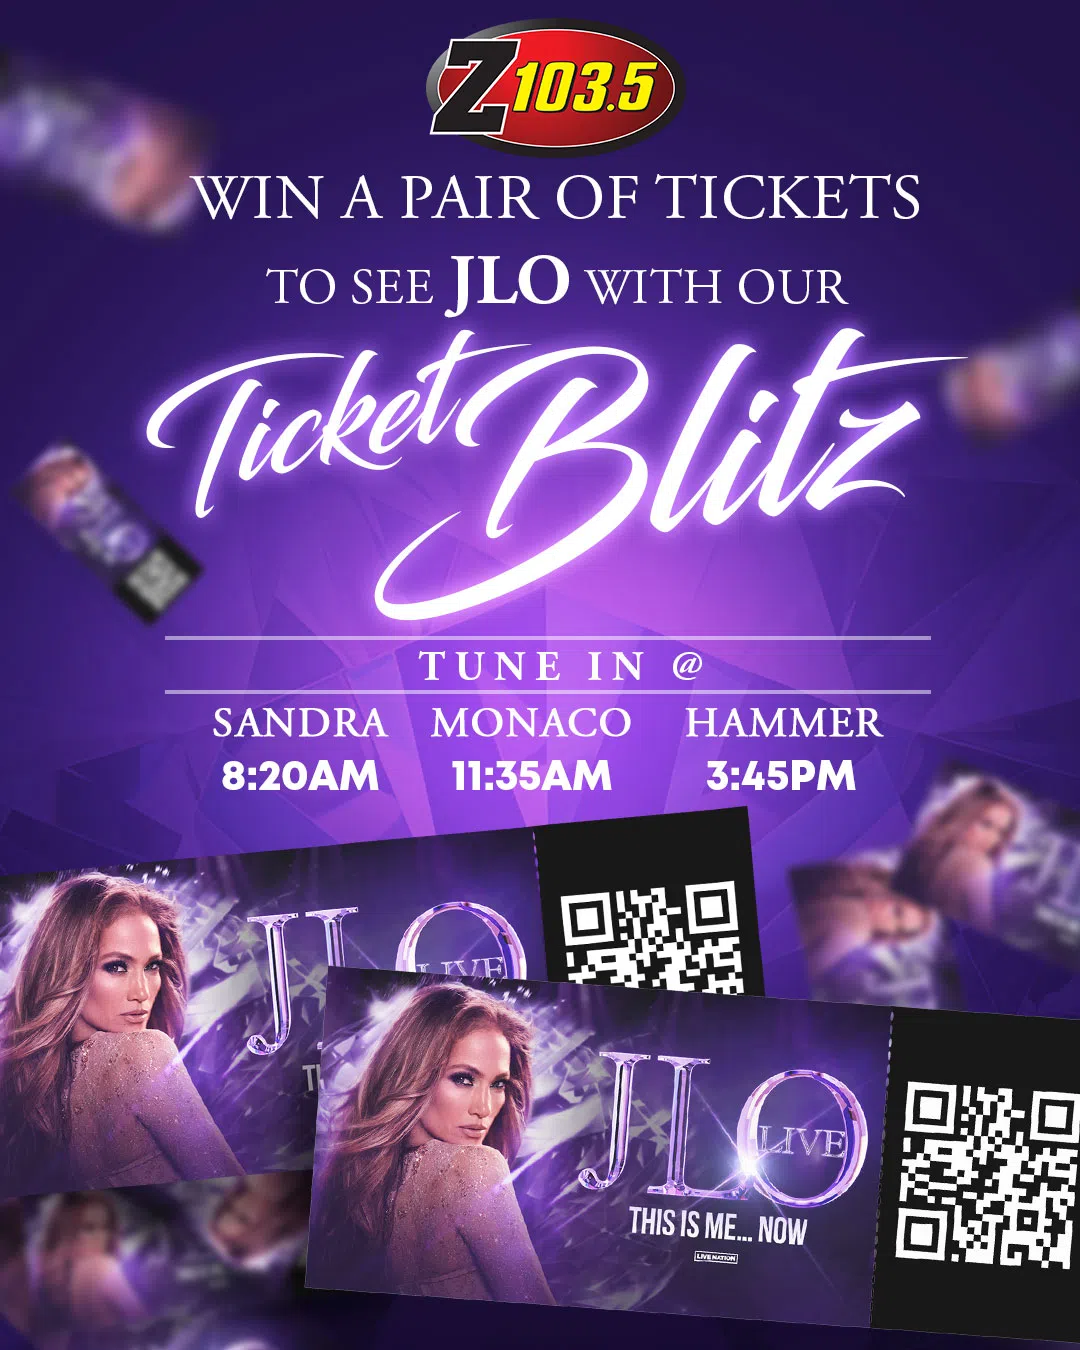 Feature: https://z1035.com/win/j-lo-blitz-win-a-pair-of-tickets/